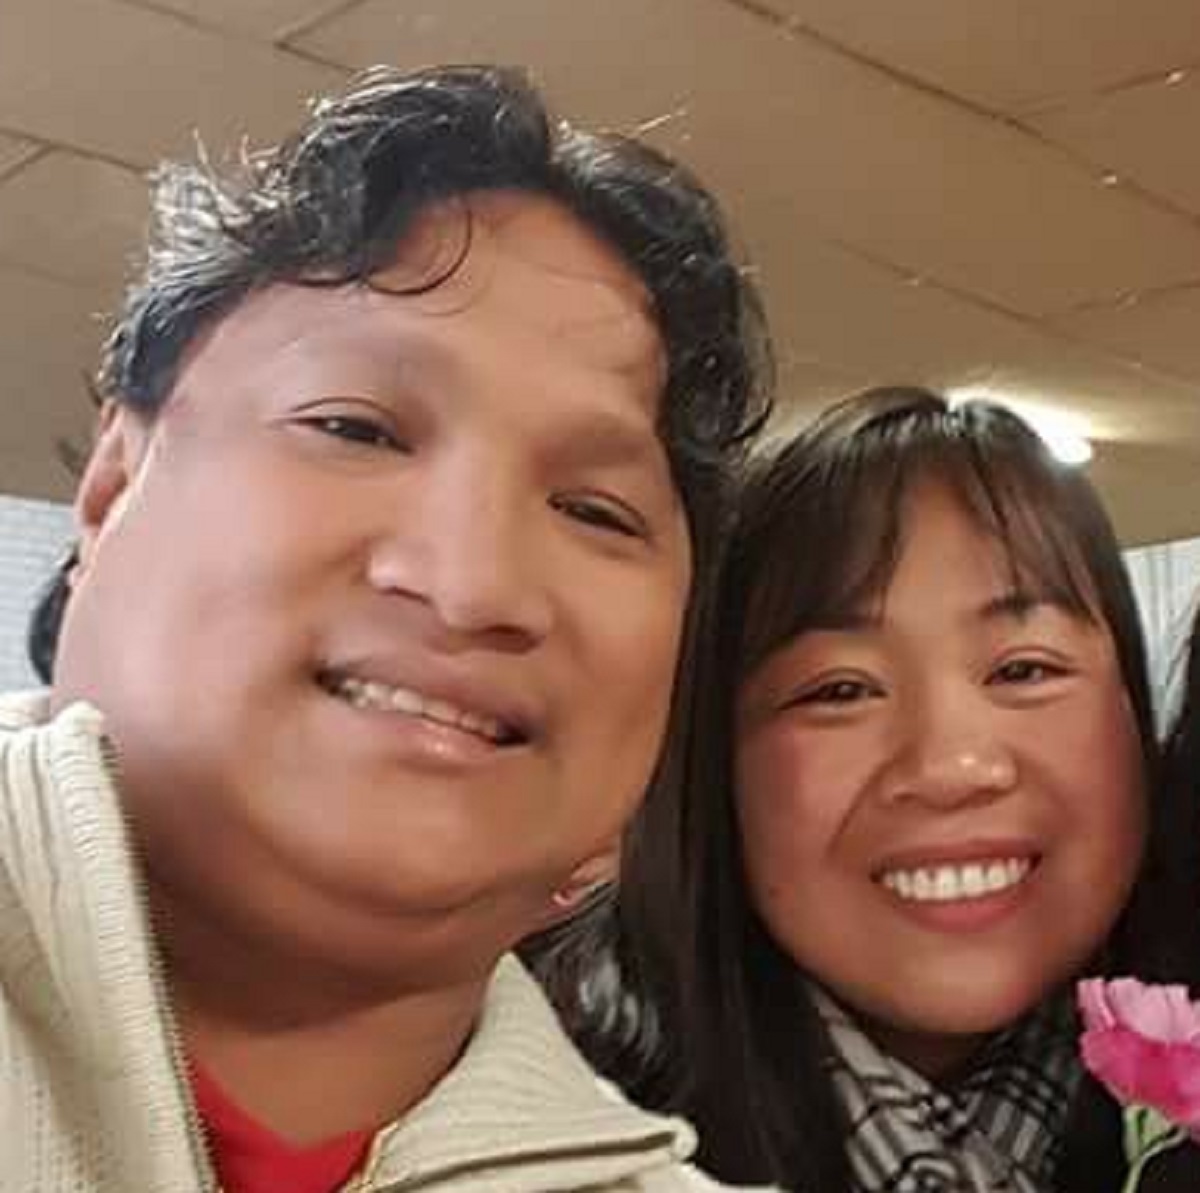 Filipino couple drowns in Australia, leaves behind 13-year-old daughter